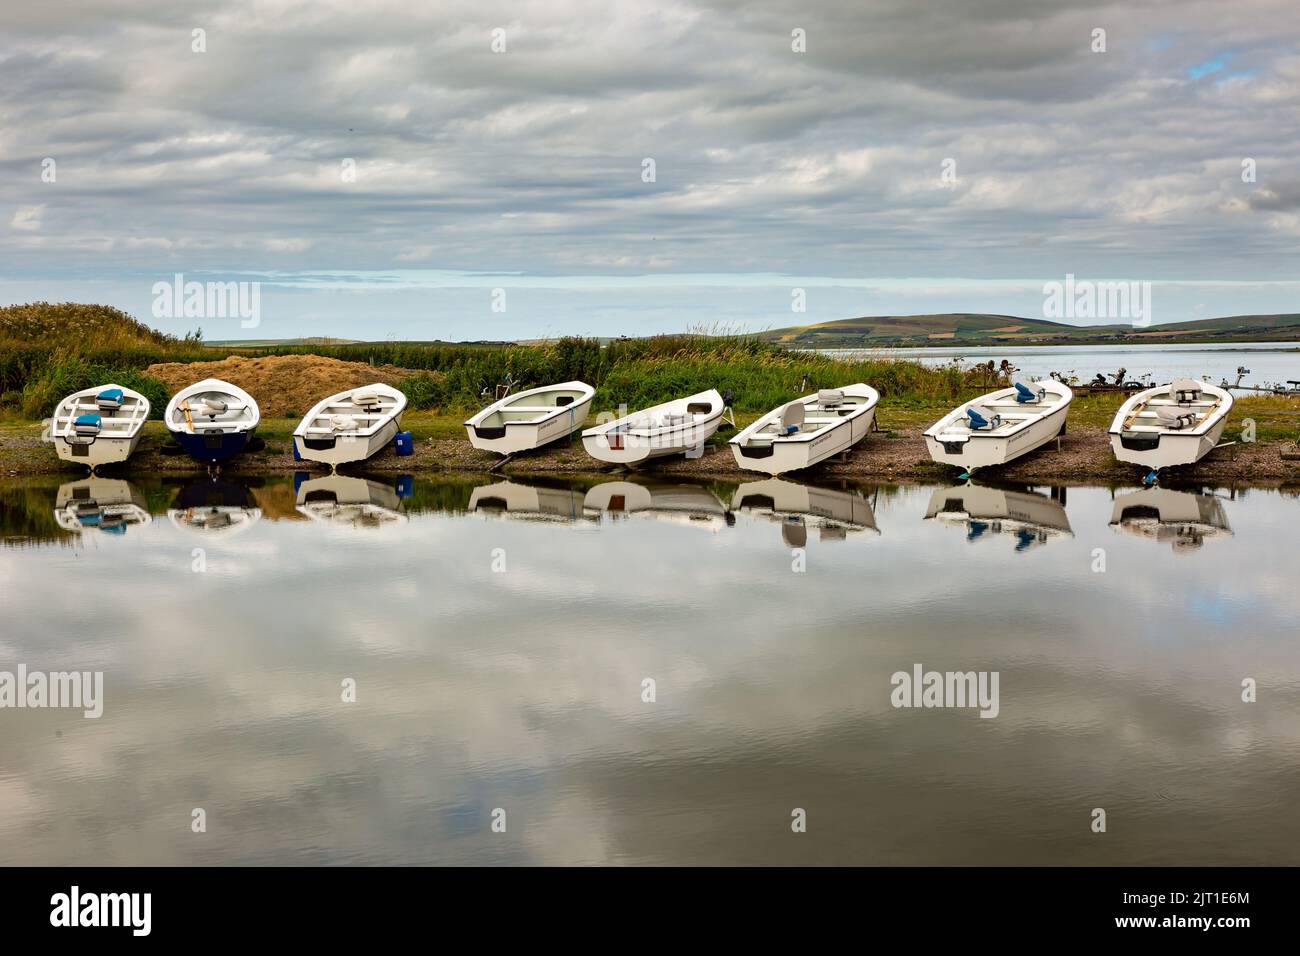 Loch Harray, Orkney, UK. 27th Aug, 2022. Dinghies are reflected in the calm waters of Loch Harray, Orkney mainland, UK. The boats are used by local fly fishing enthusiasts. Credit: Peter Lopeman/Alamy Live News Stock Photo